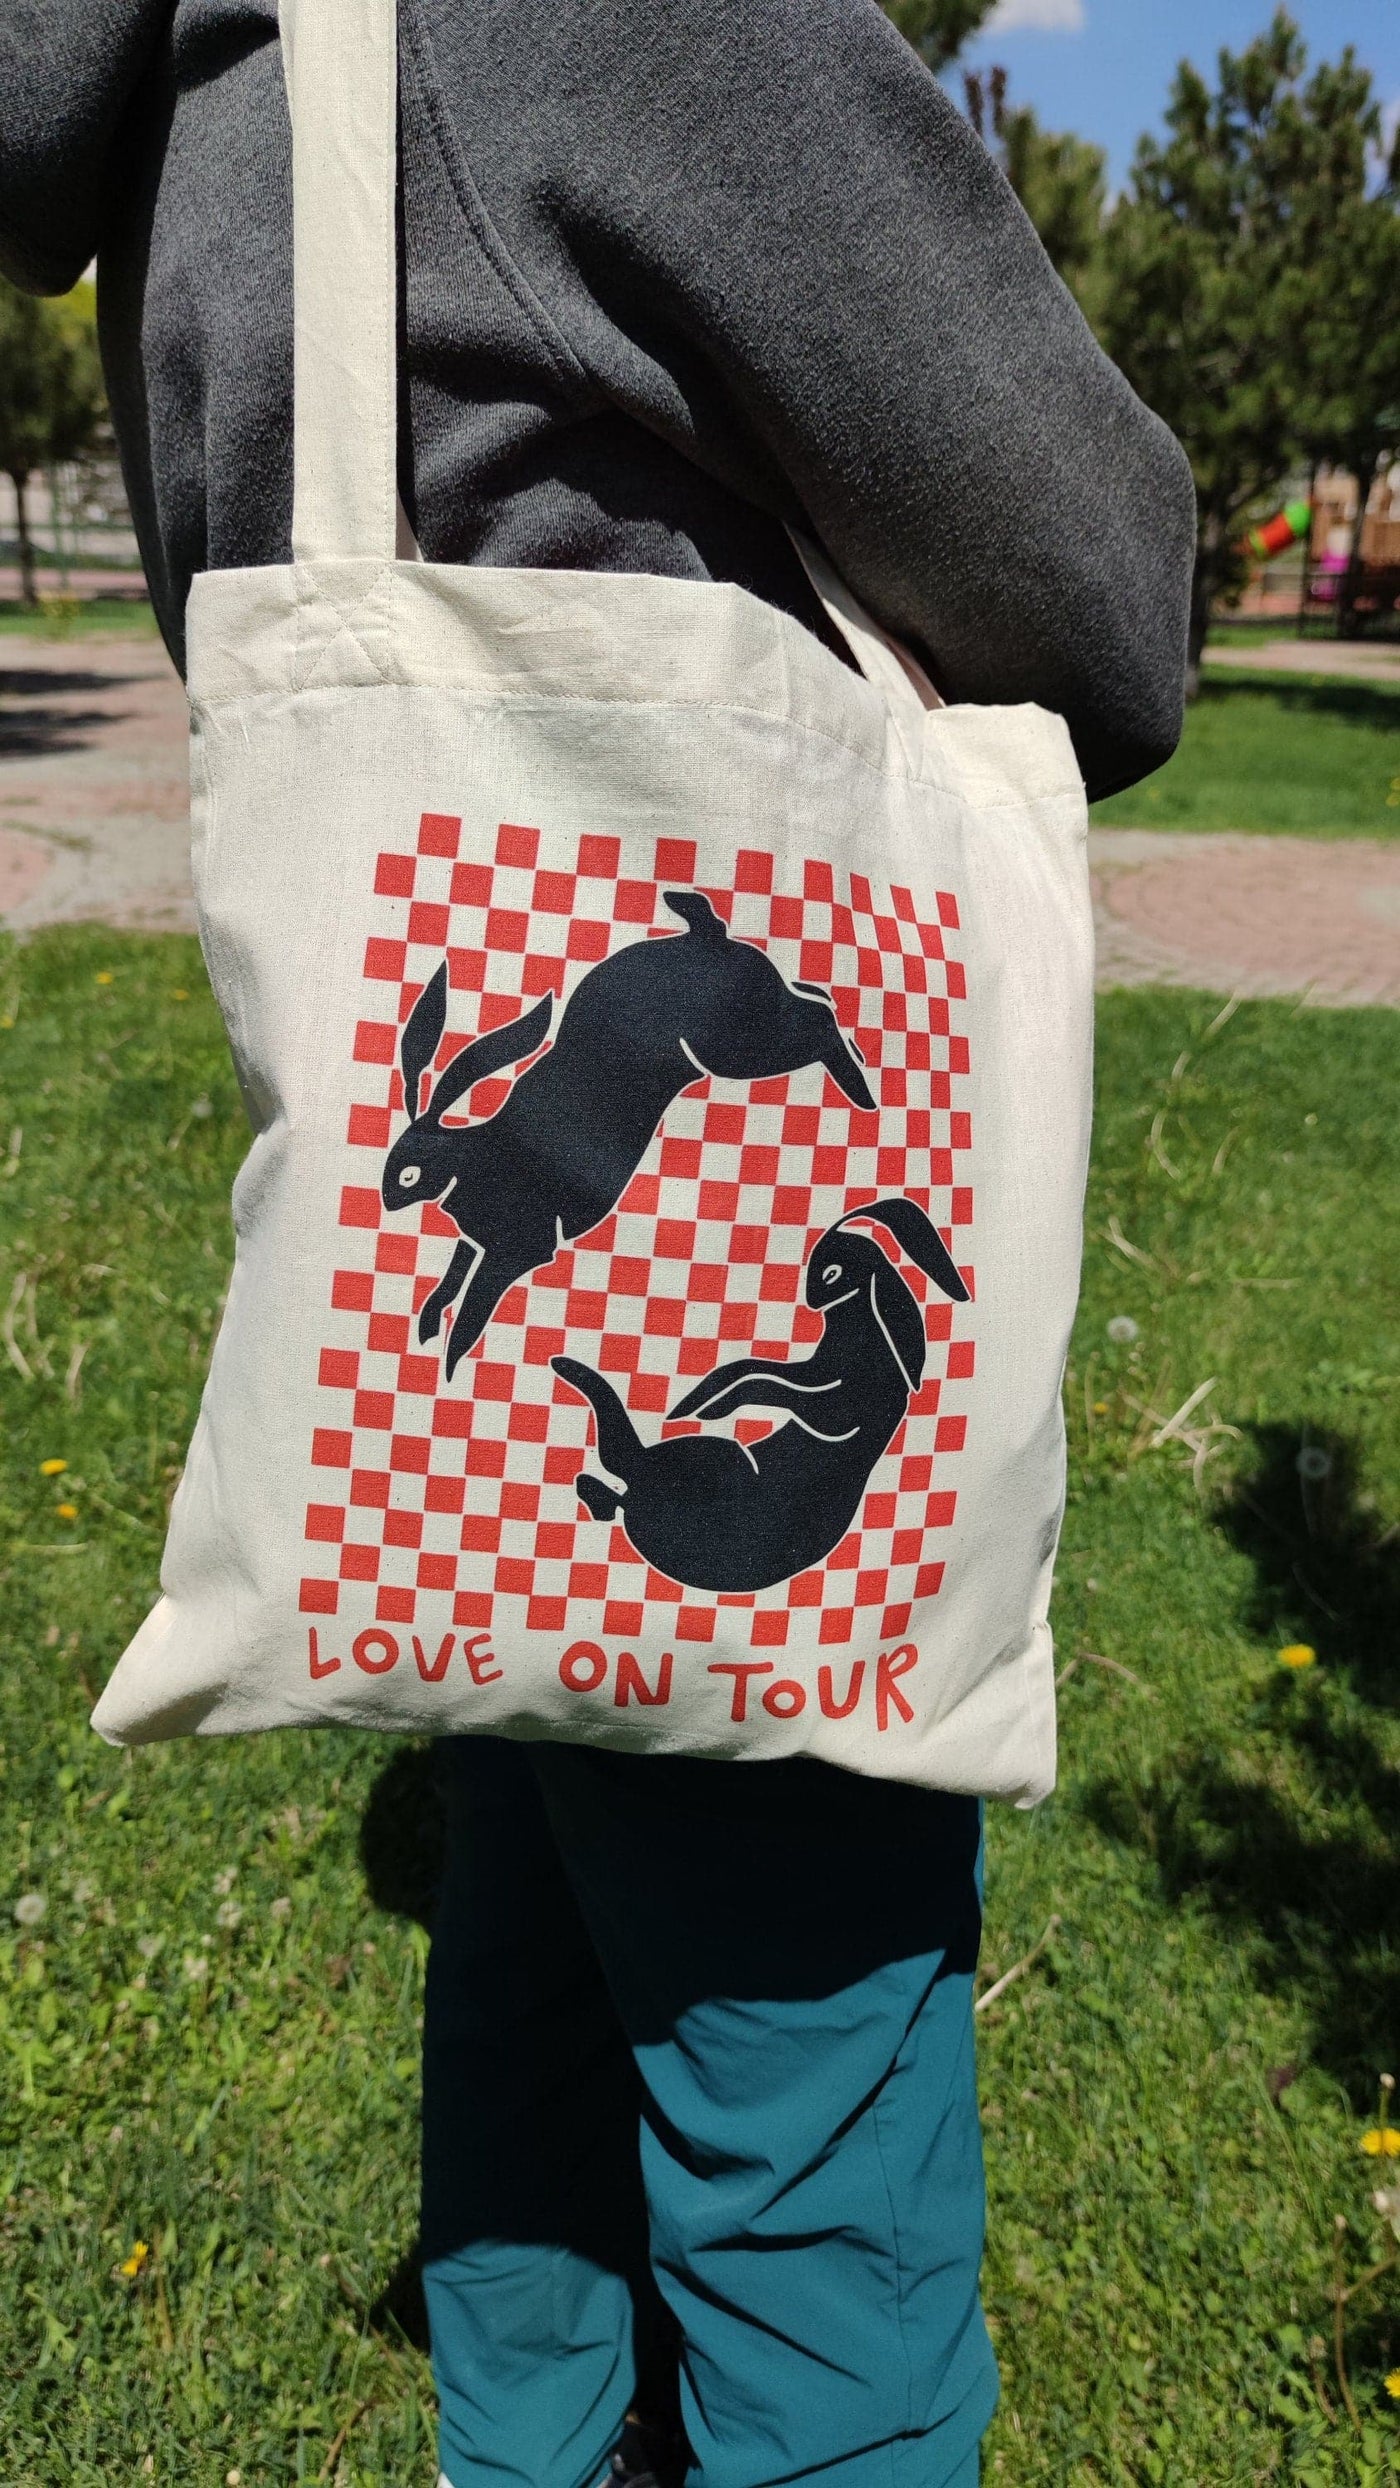 Harry Styles Love On Tour Tote Bag, Harry's House, Harry Styles Merch, Harry Styles Bunny Tote Bag, Harry Styles Aesthetic